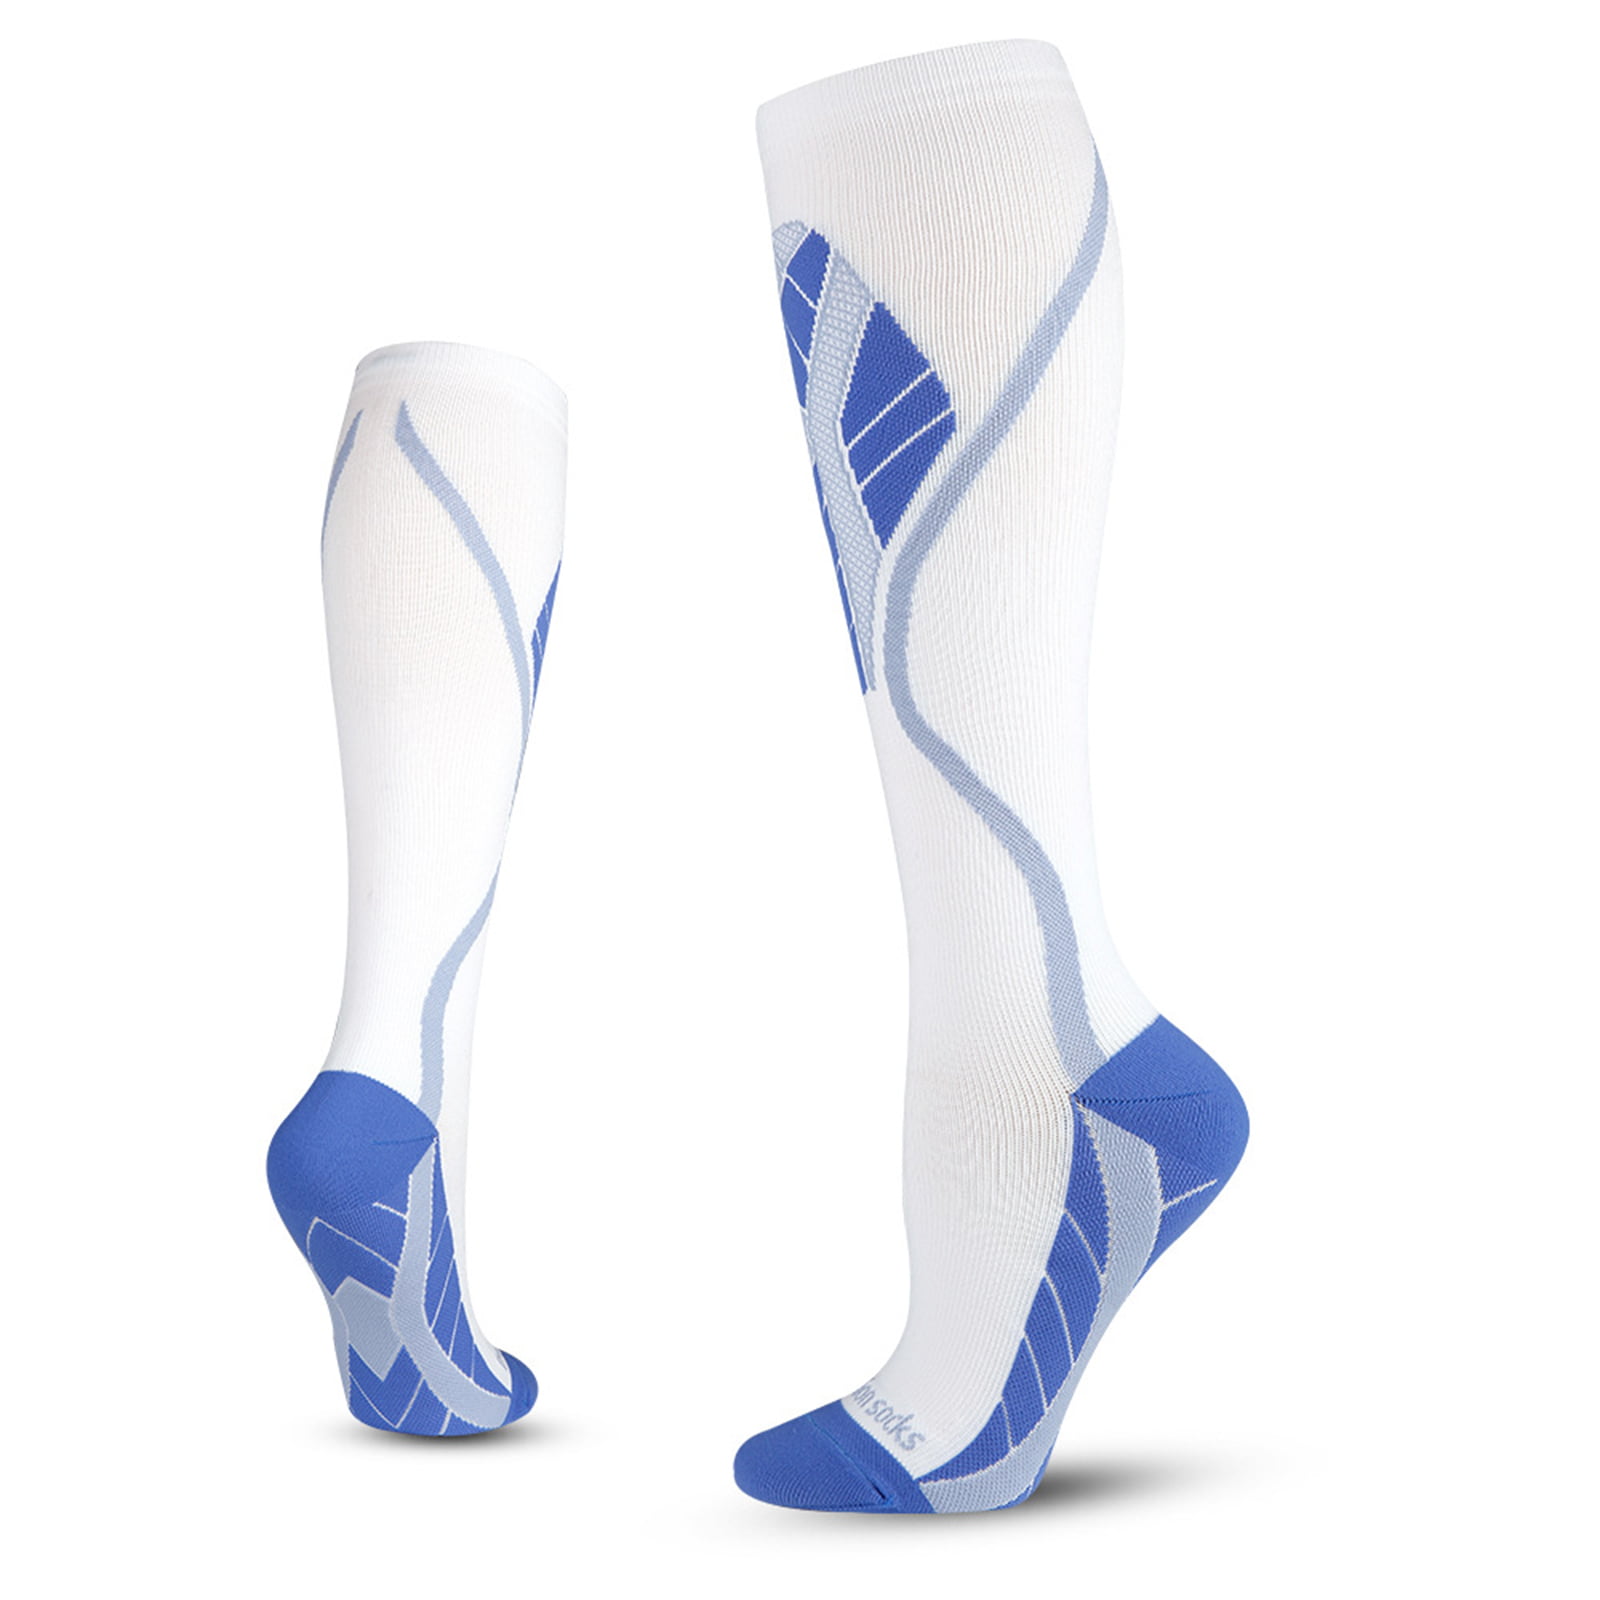 Details about   Outdoor Sport Compression Riding Sock Women Men Cycling Running Calf Length 